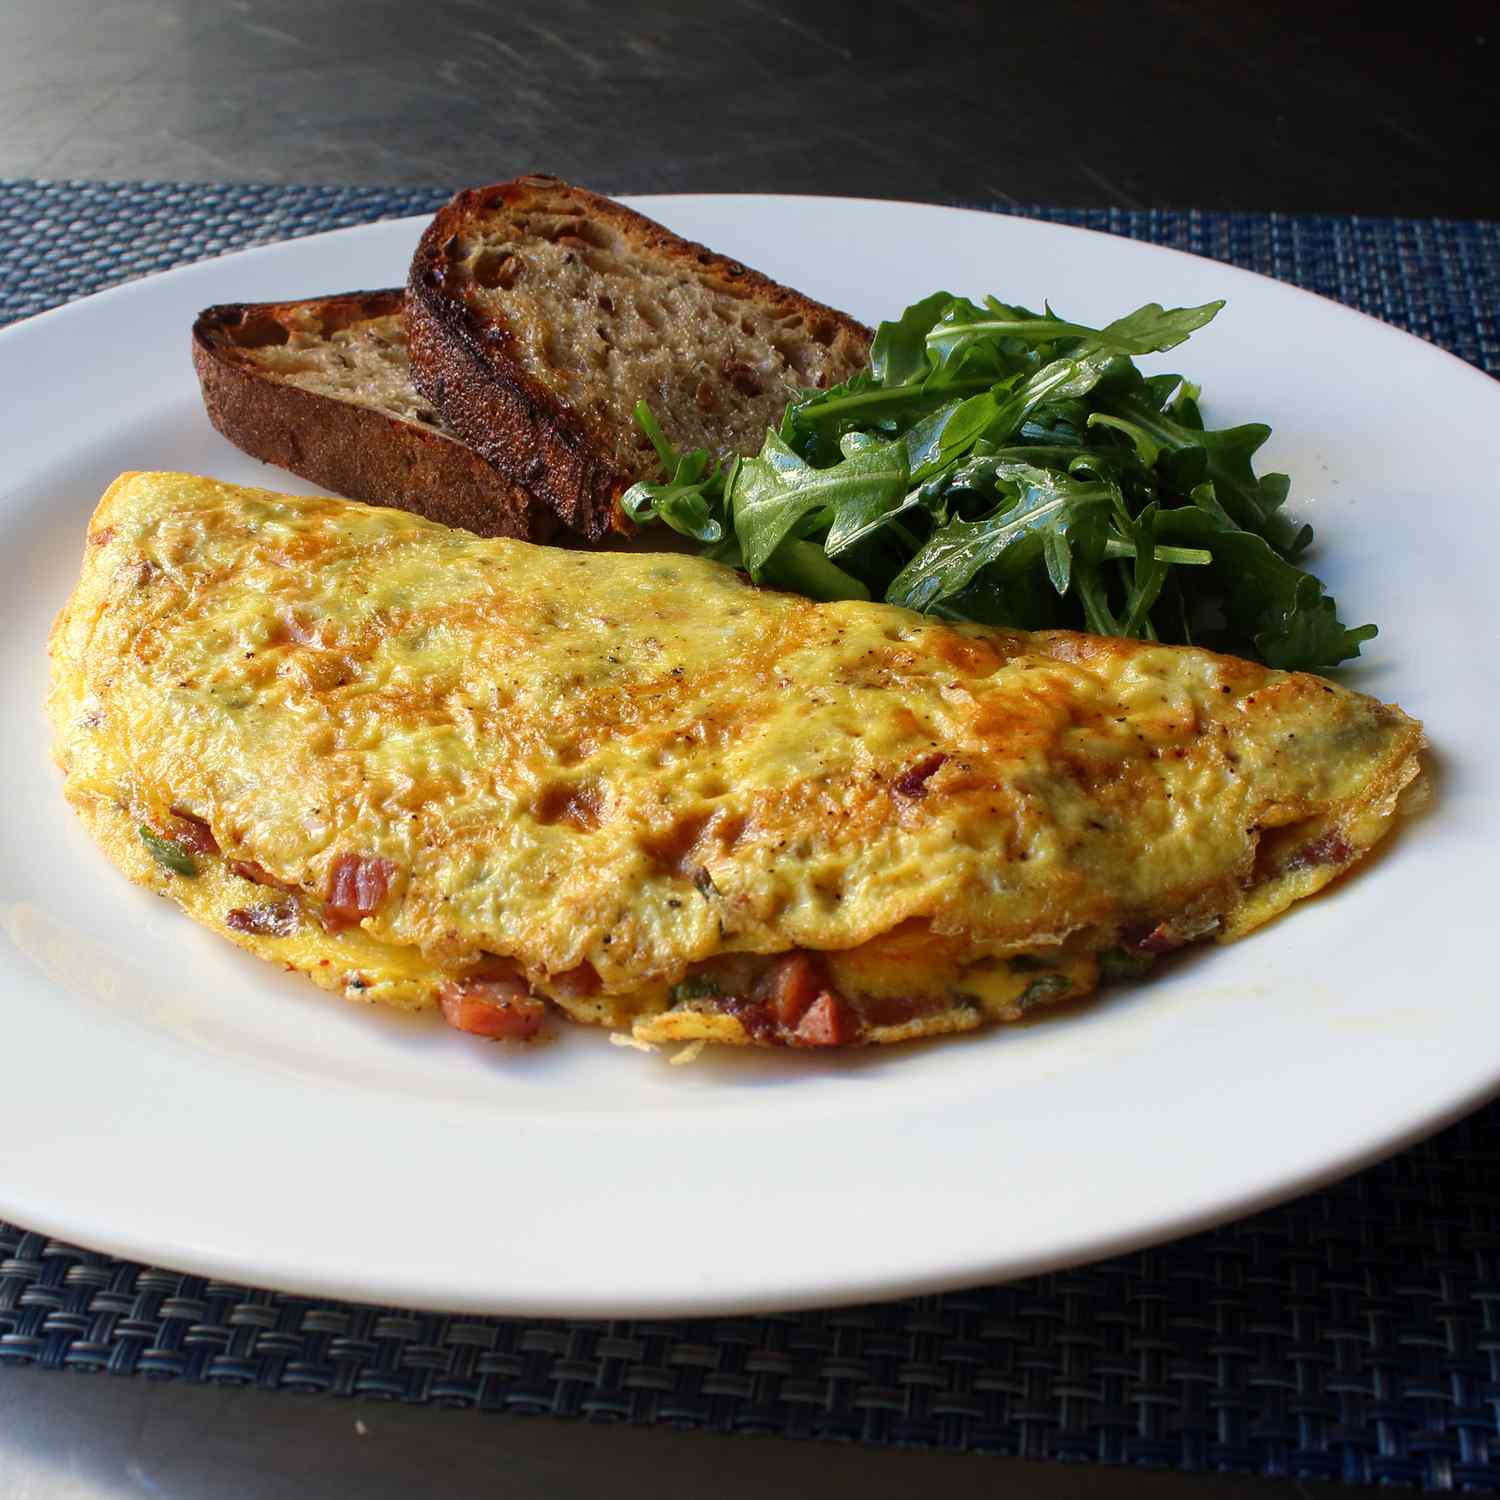 close up view of a Denver omelet with toast and an arugula salad on a plate